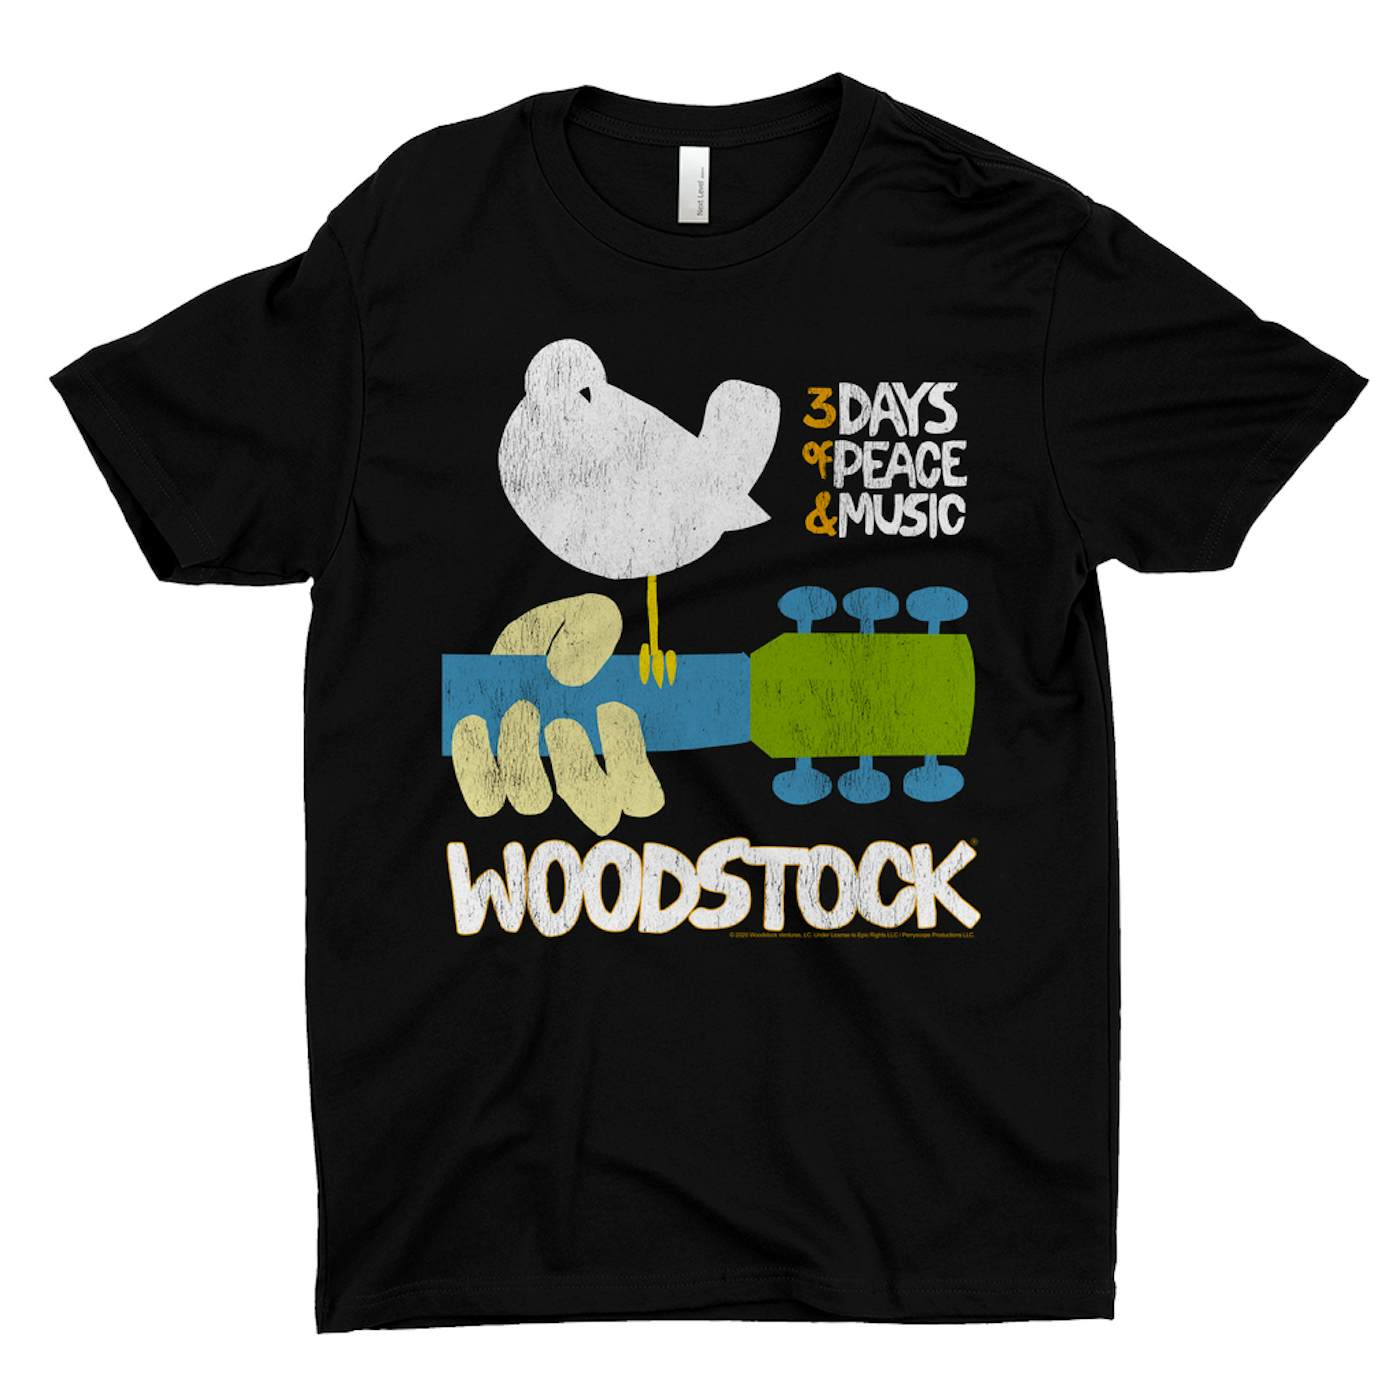 Woodstock T-Shirt | 3 Days Of Peace And Music Woodstock Shirt